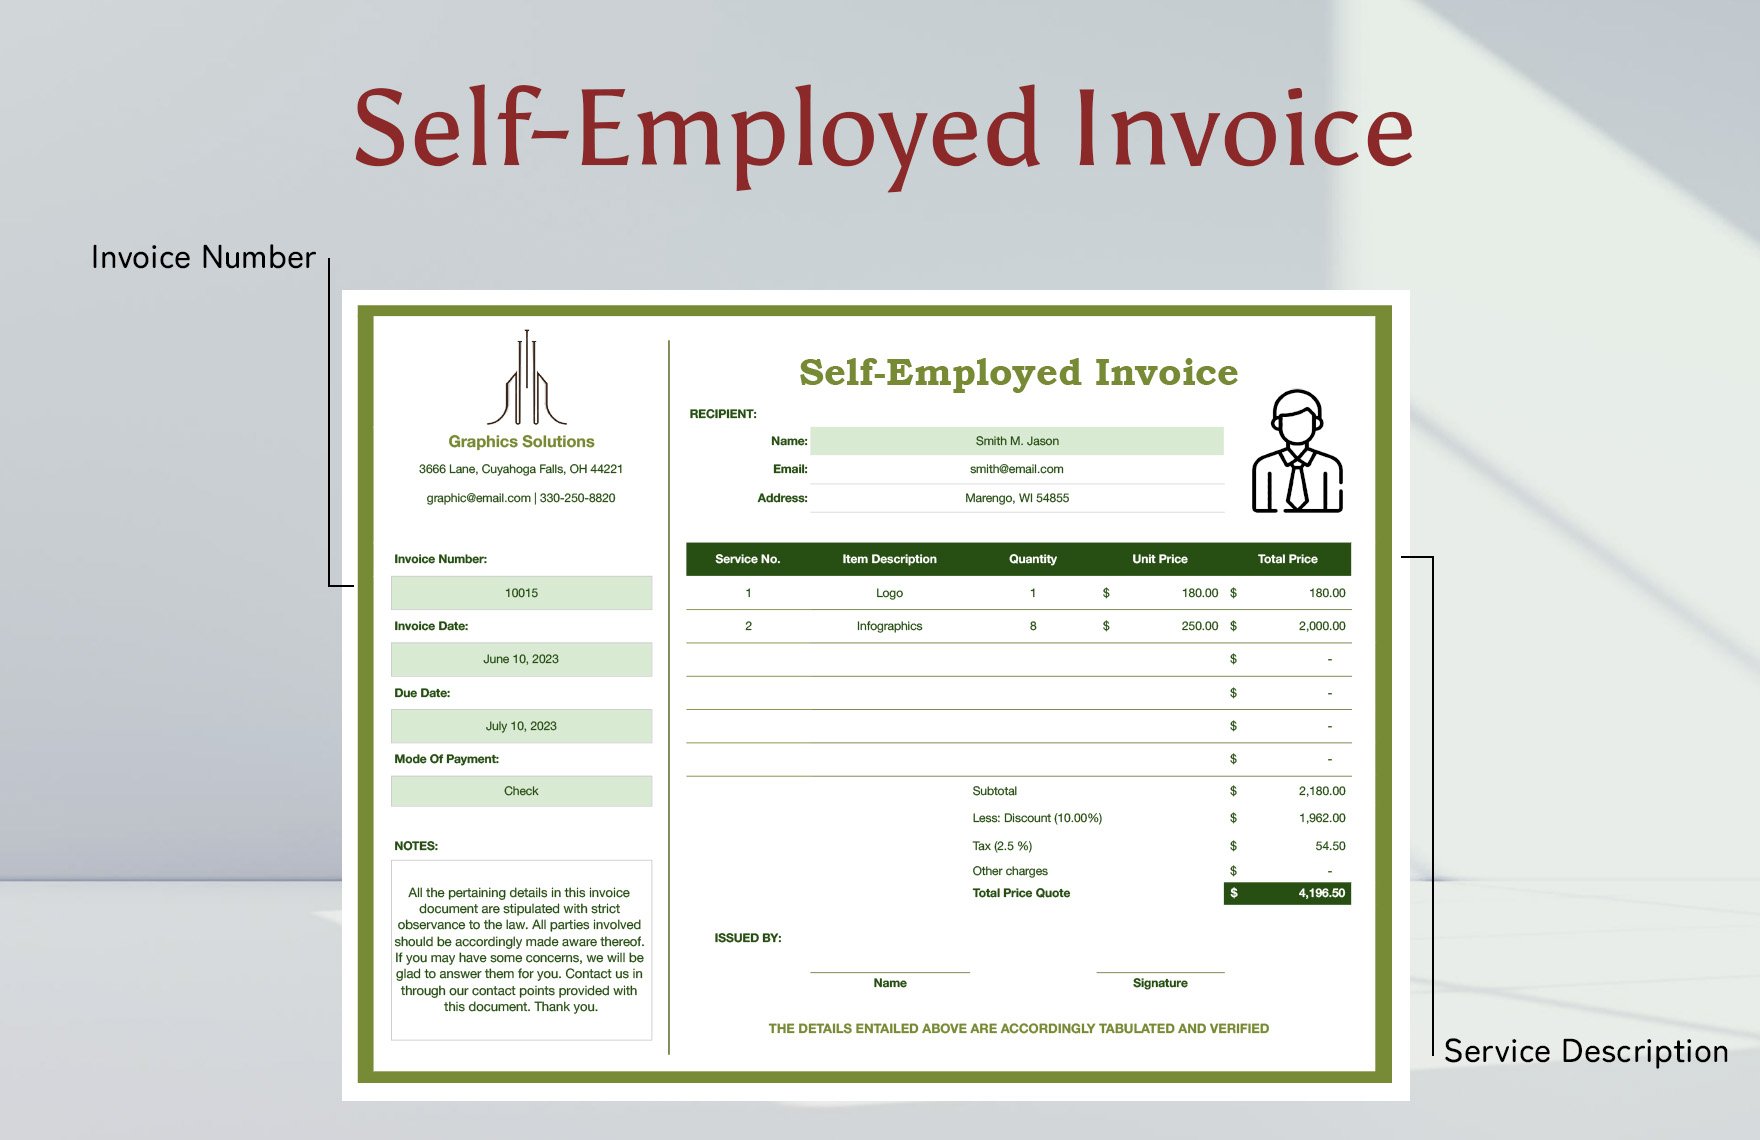 SelfEmployed Invoice Template